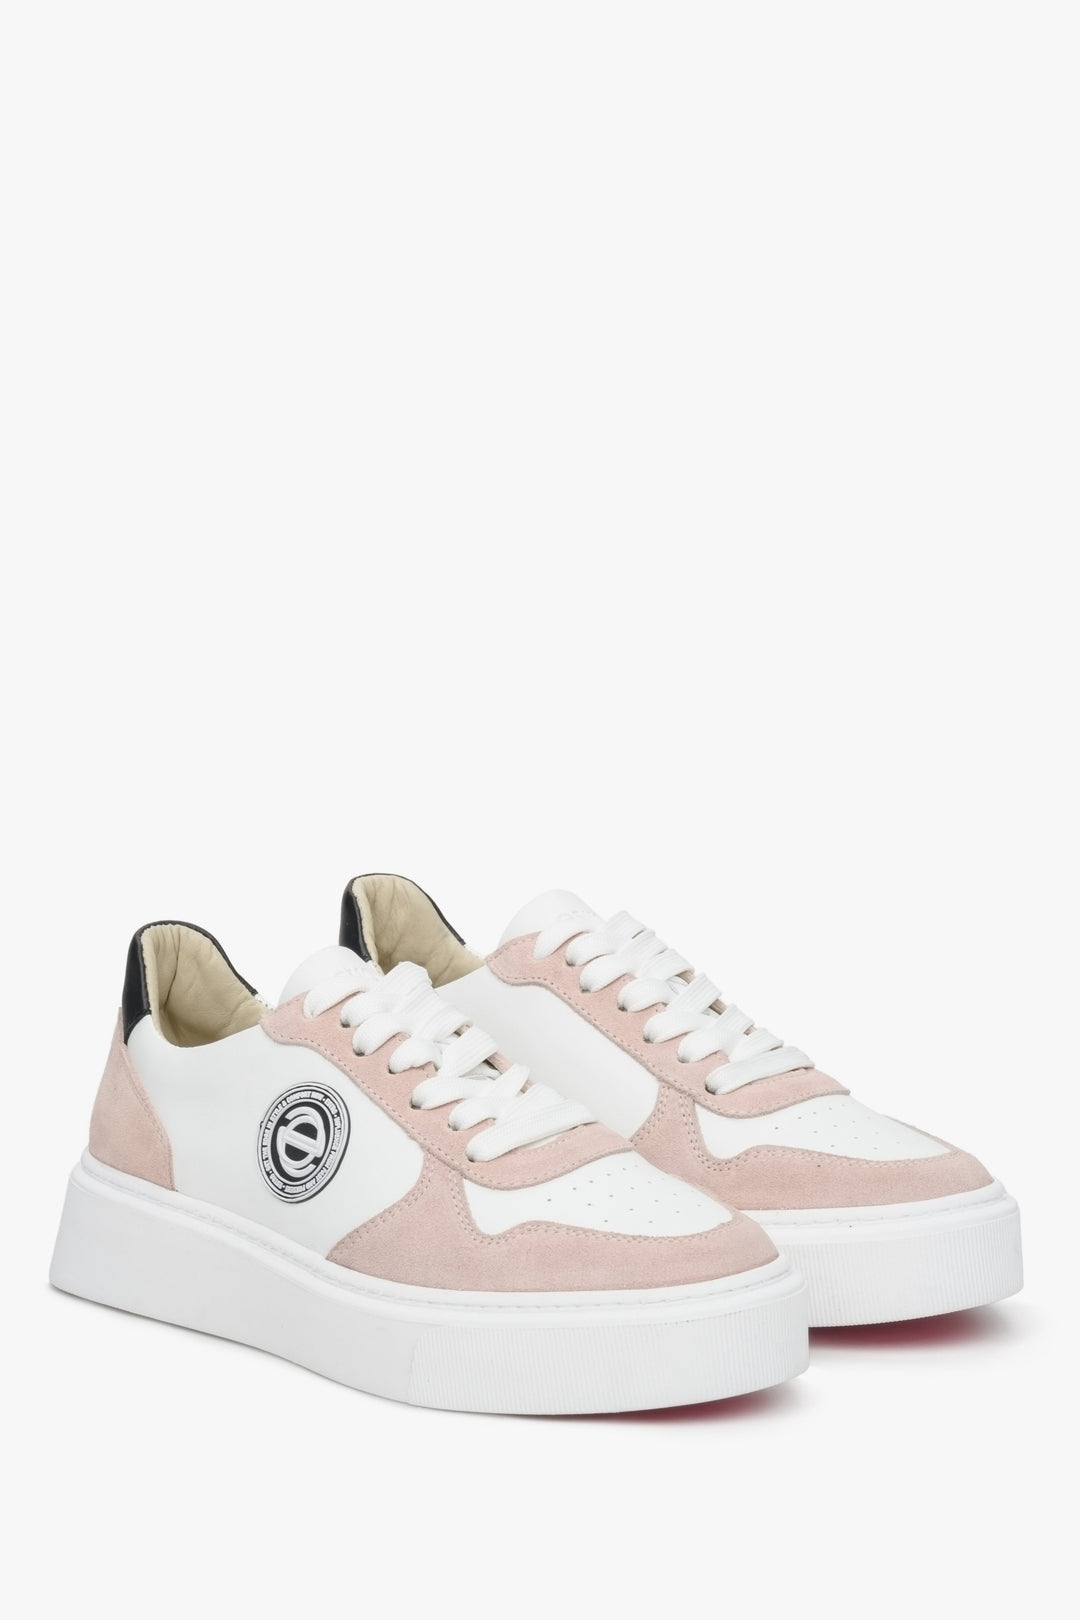 Women's velour and natural leather Estro sneakers with lacing in white and pink.